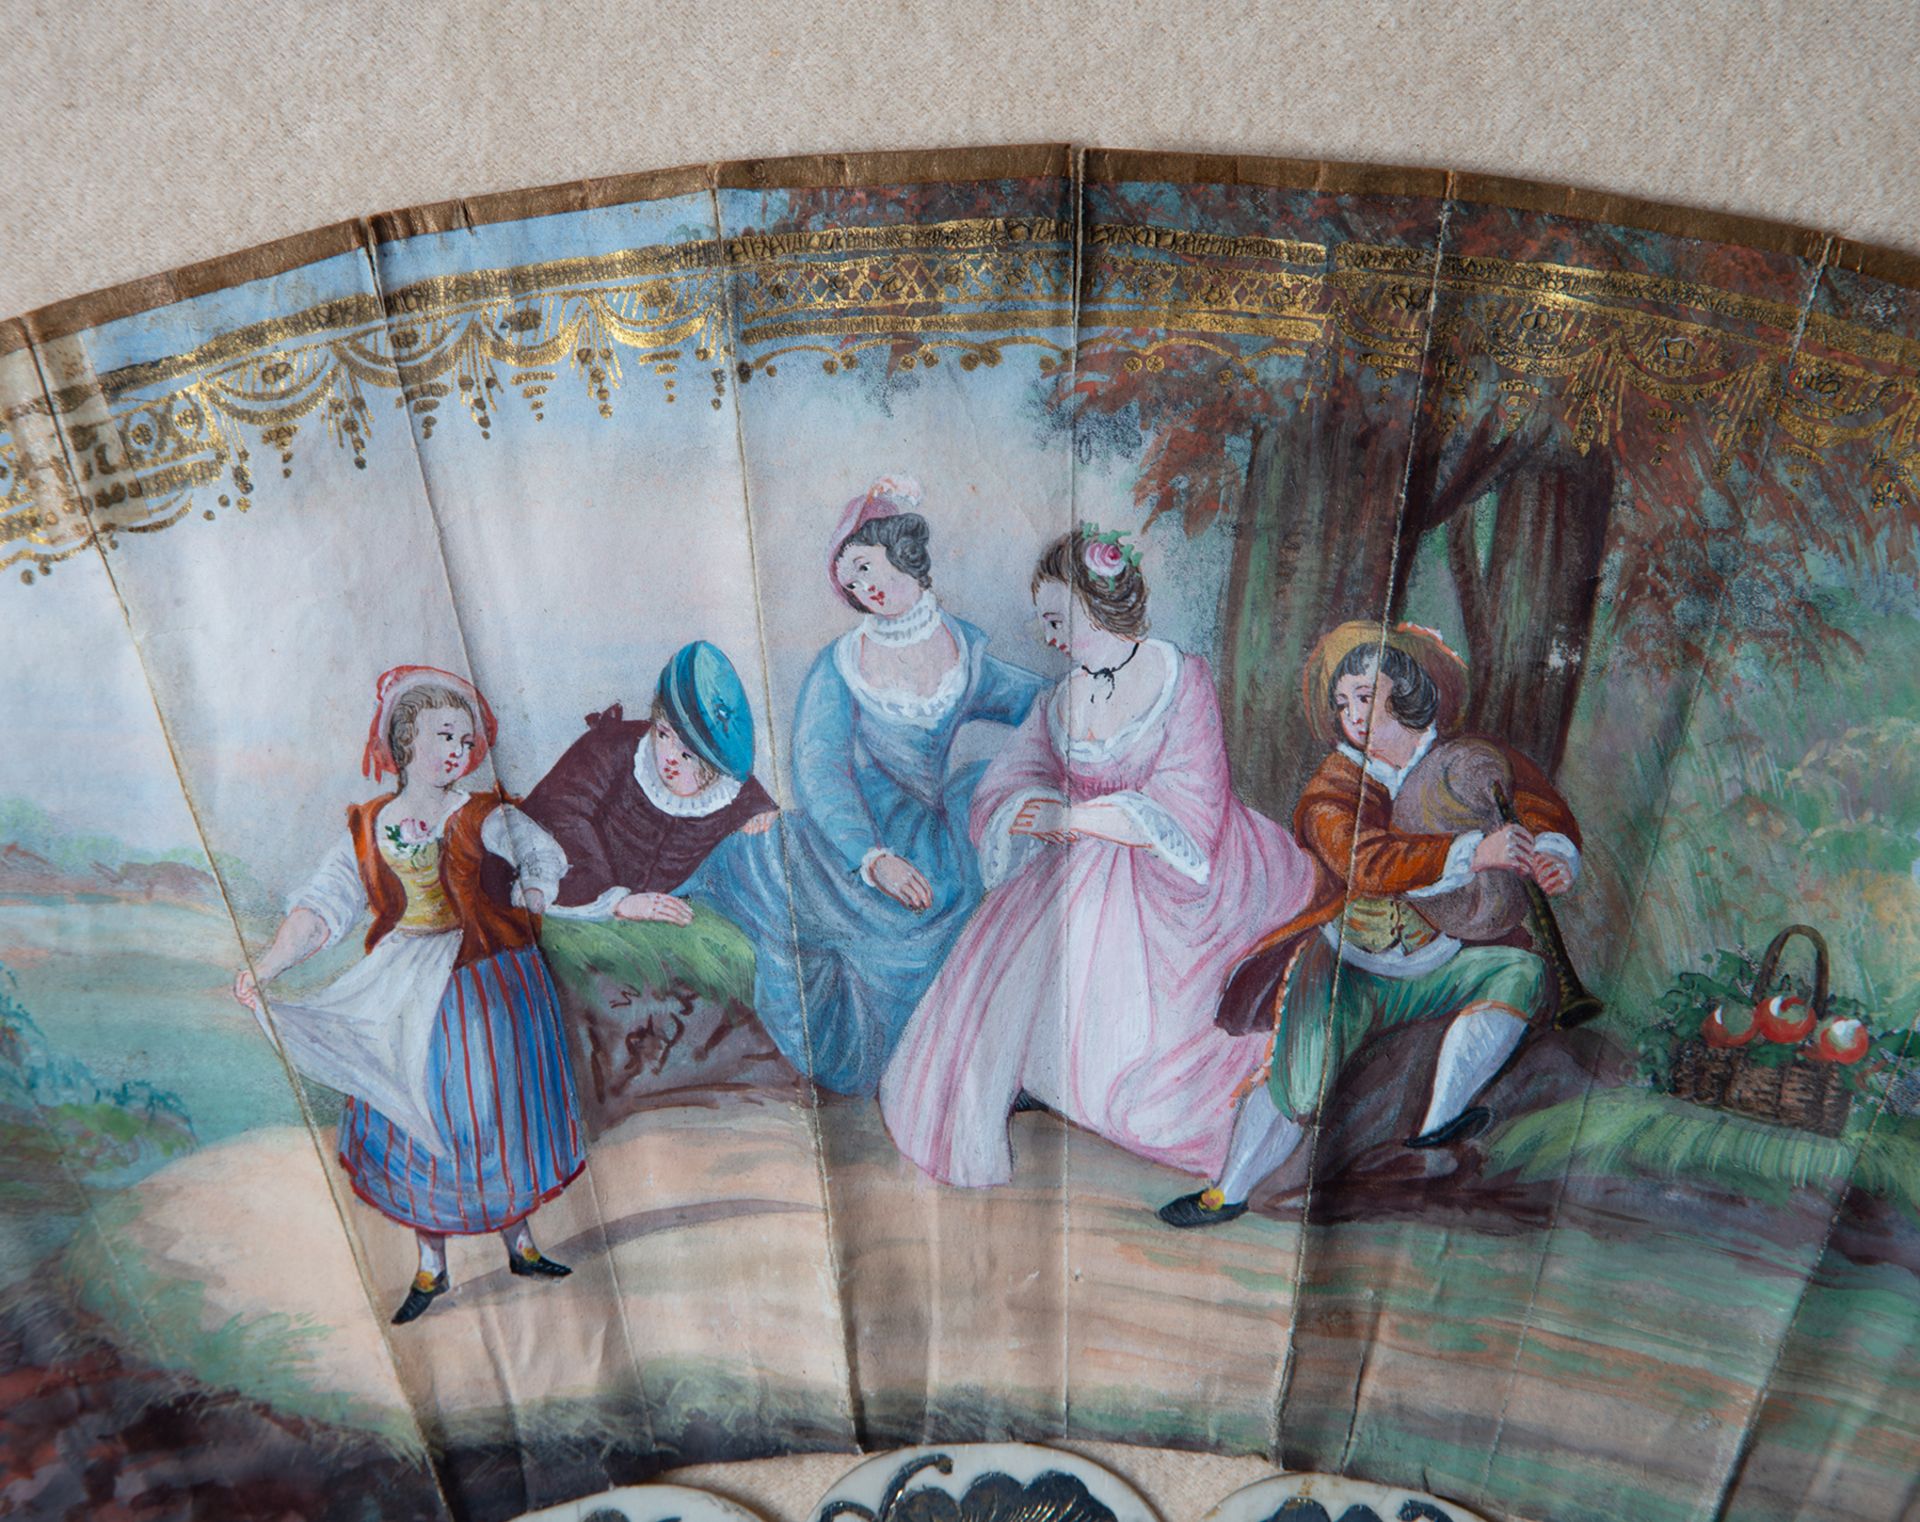 Fan with a hand-painted gallant scene, 19th century - Bild 2 aus 3